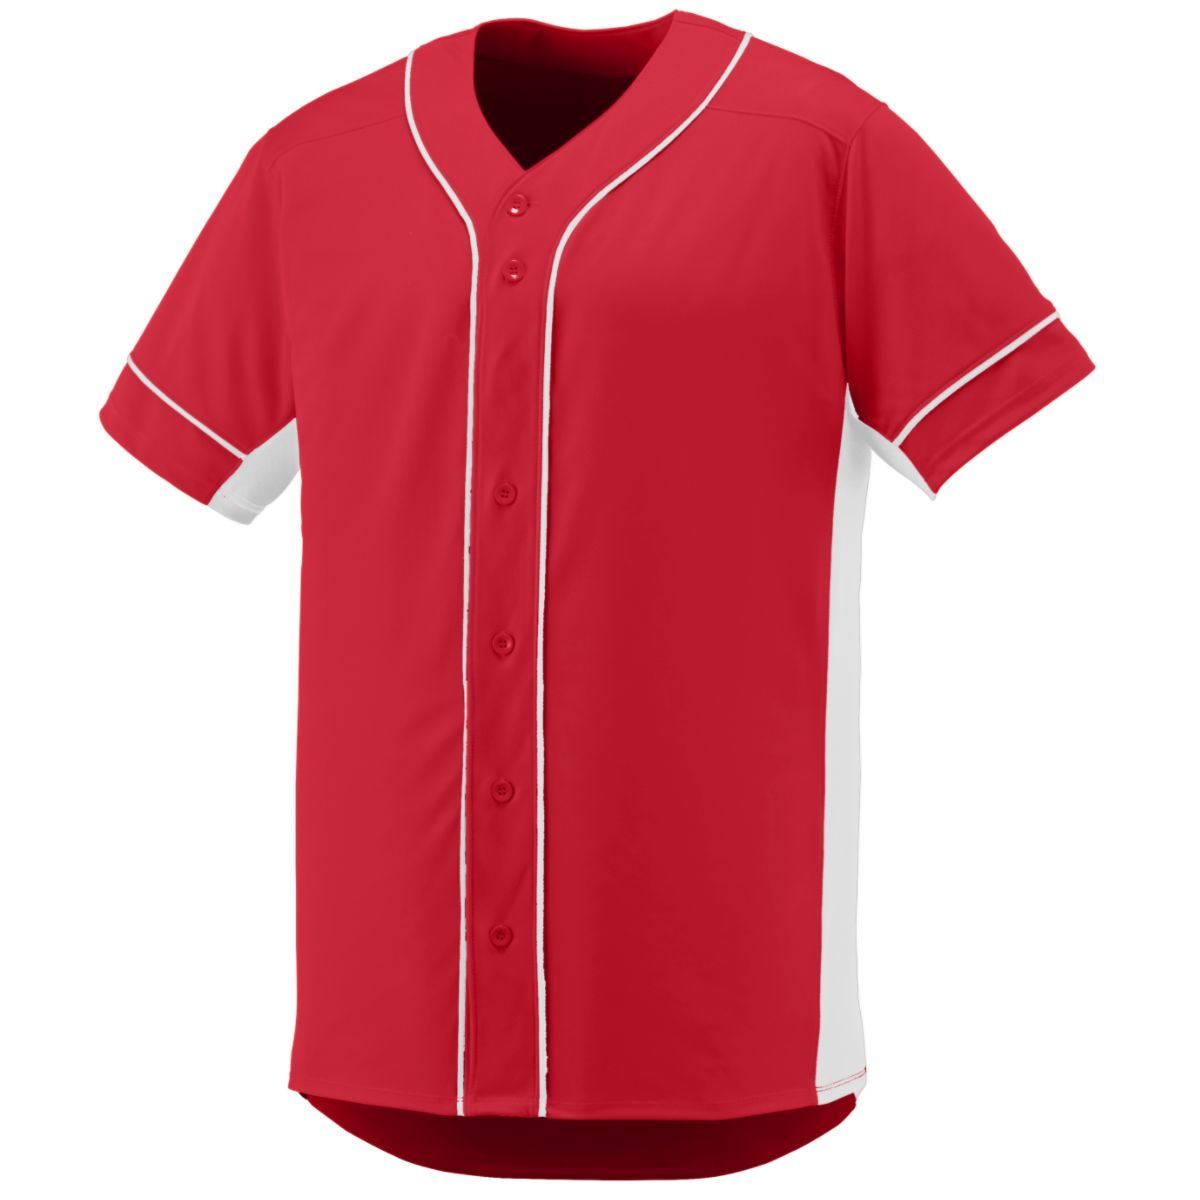 Augusta Sportswear Youth Slugger Jersey in Red/White  -Part of the Youth, Youth-Jersey, Augusta-Products, Baseball, Shirts, All-Sports, All-Sports-1 product lines at KanaleyCreations.com